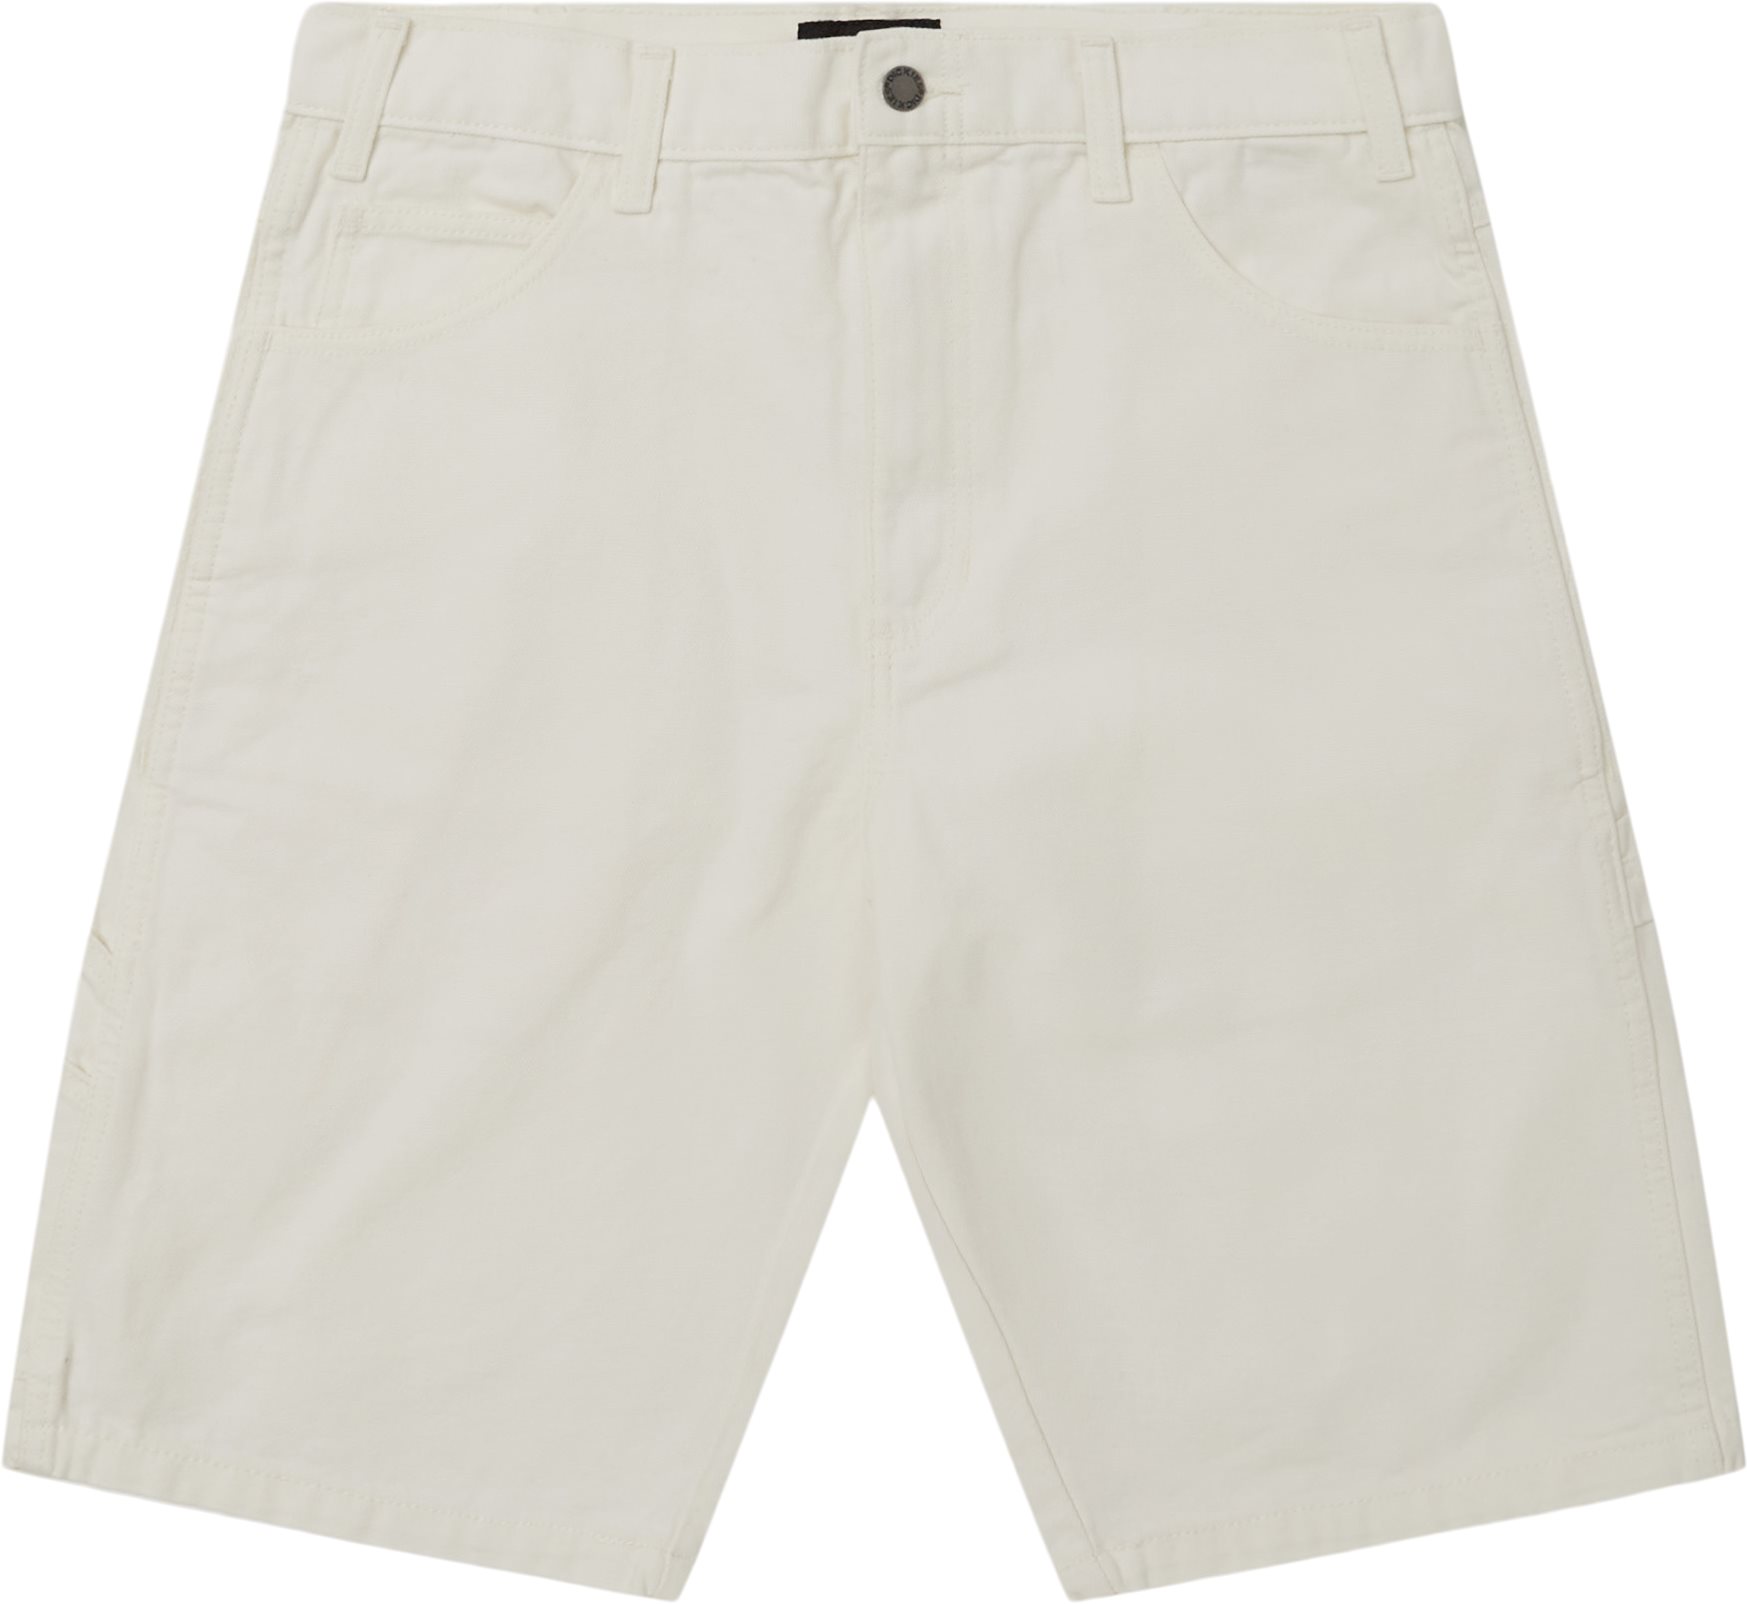 Dickies Shorts DUCK CANVAS SHORTS White